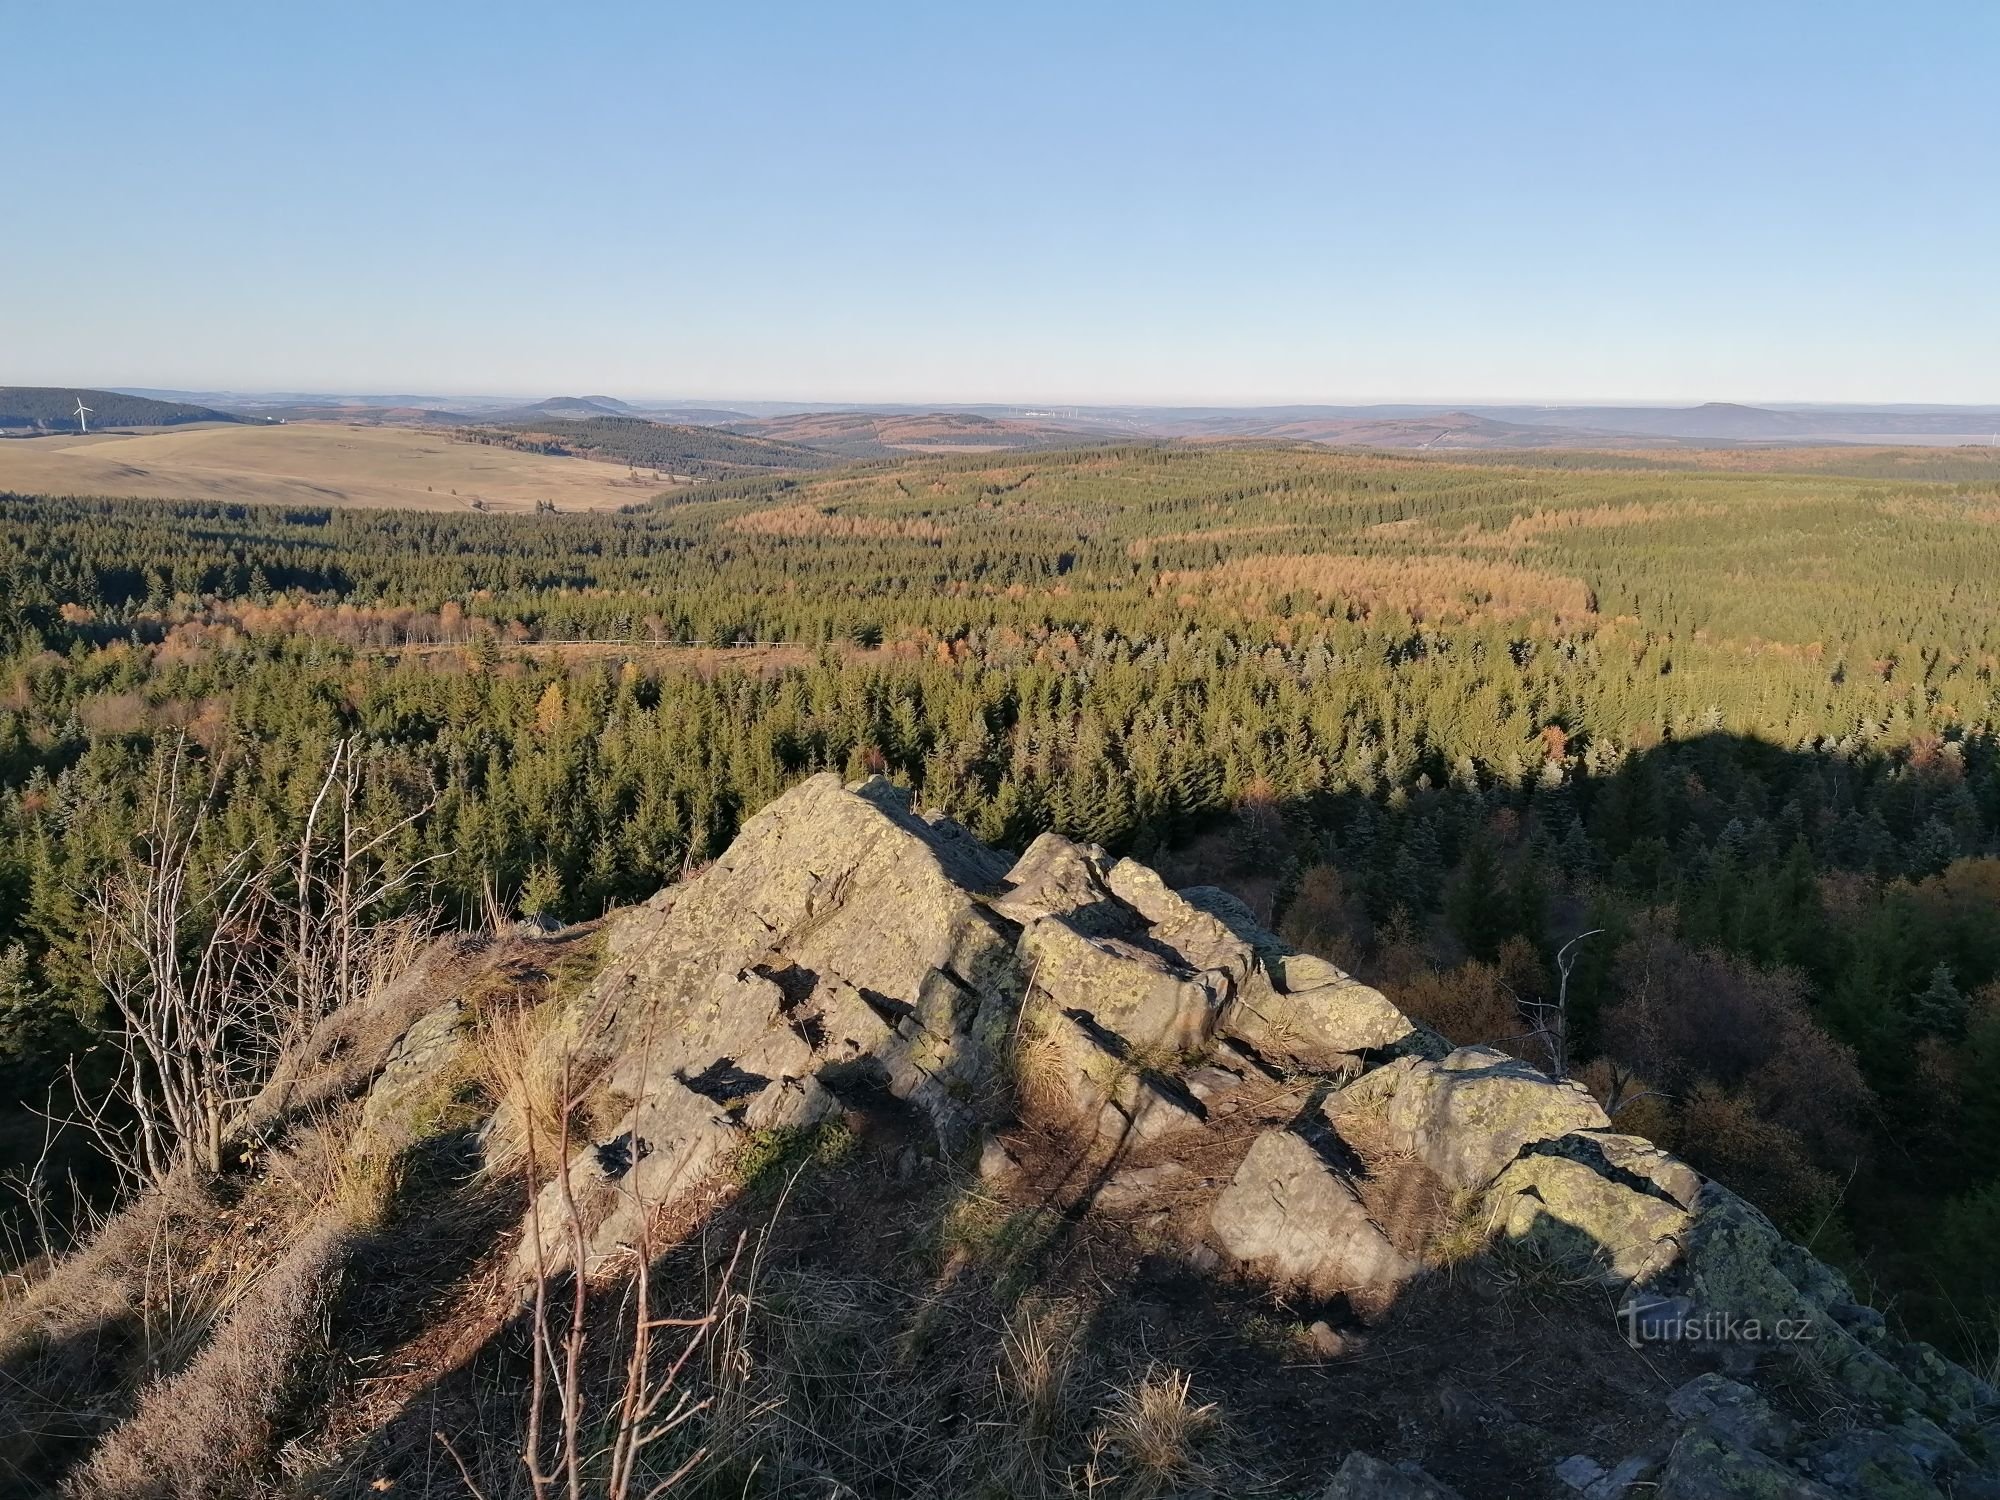 Meluzína in the Ore Mountains, but this time she didn't howl